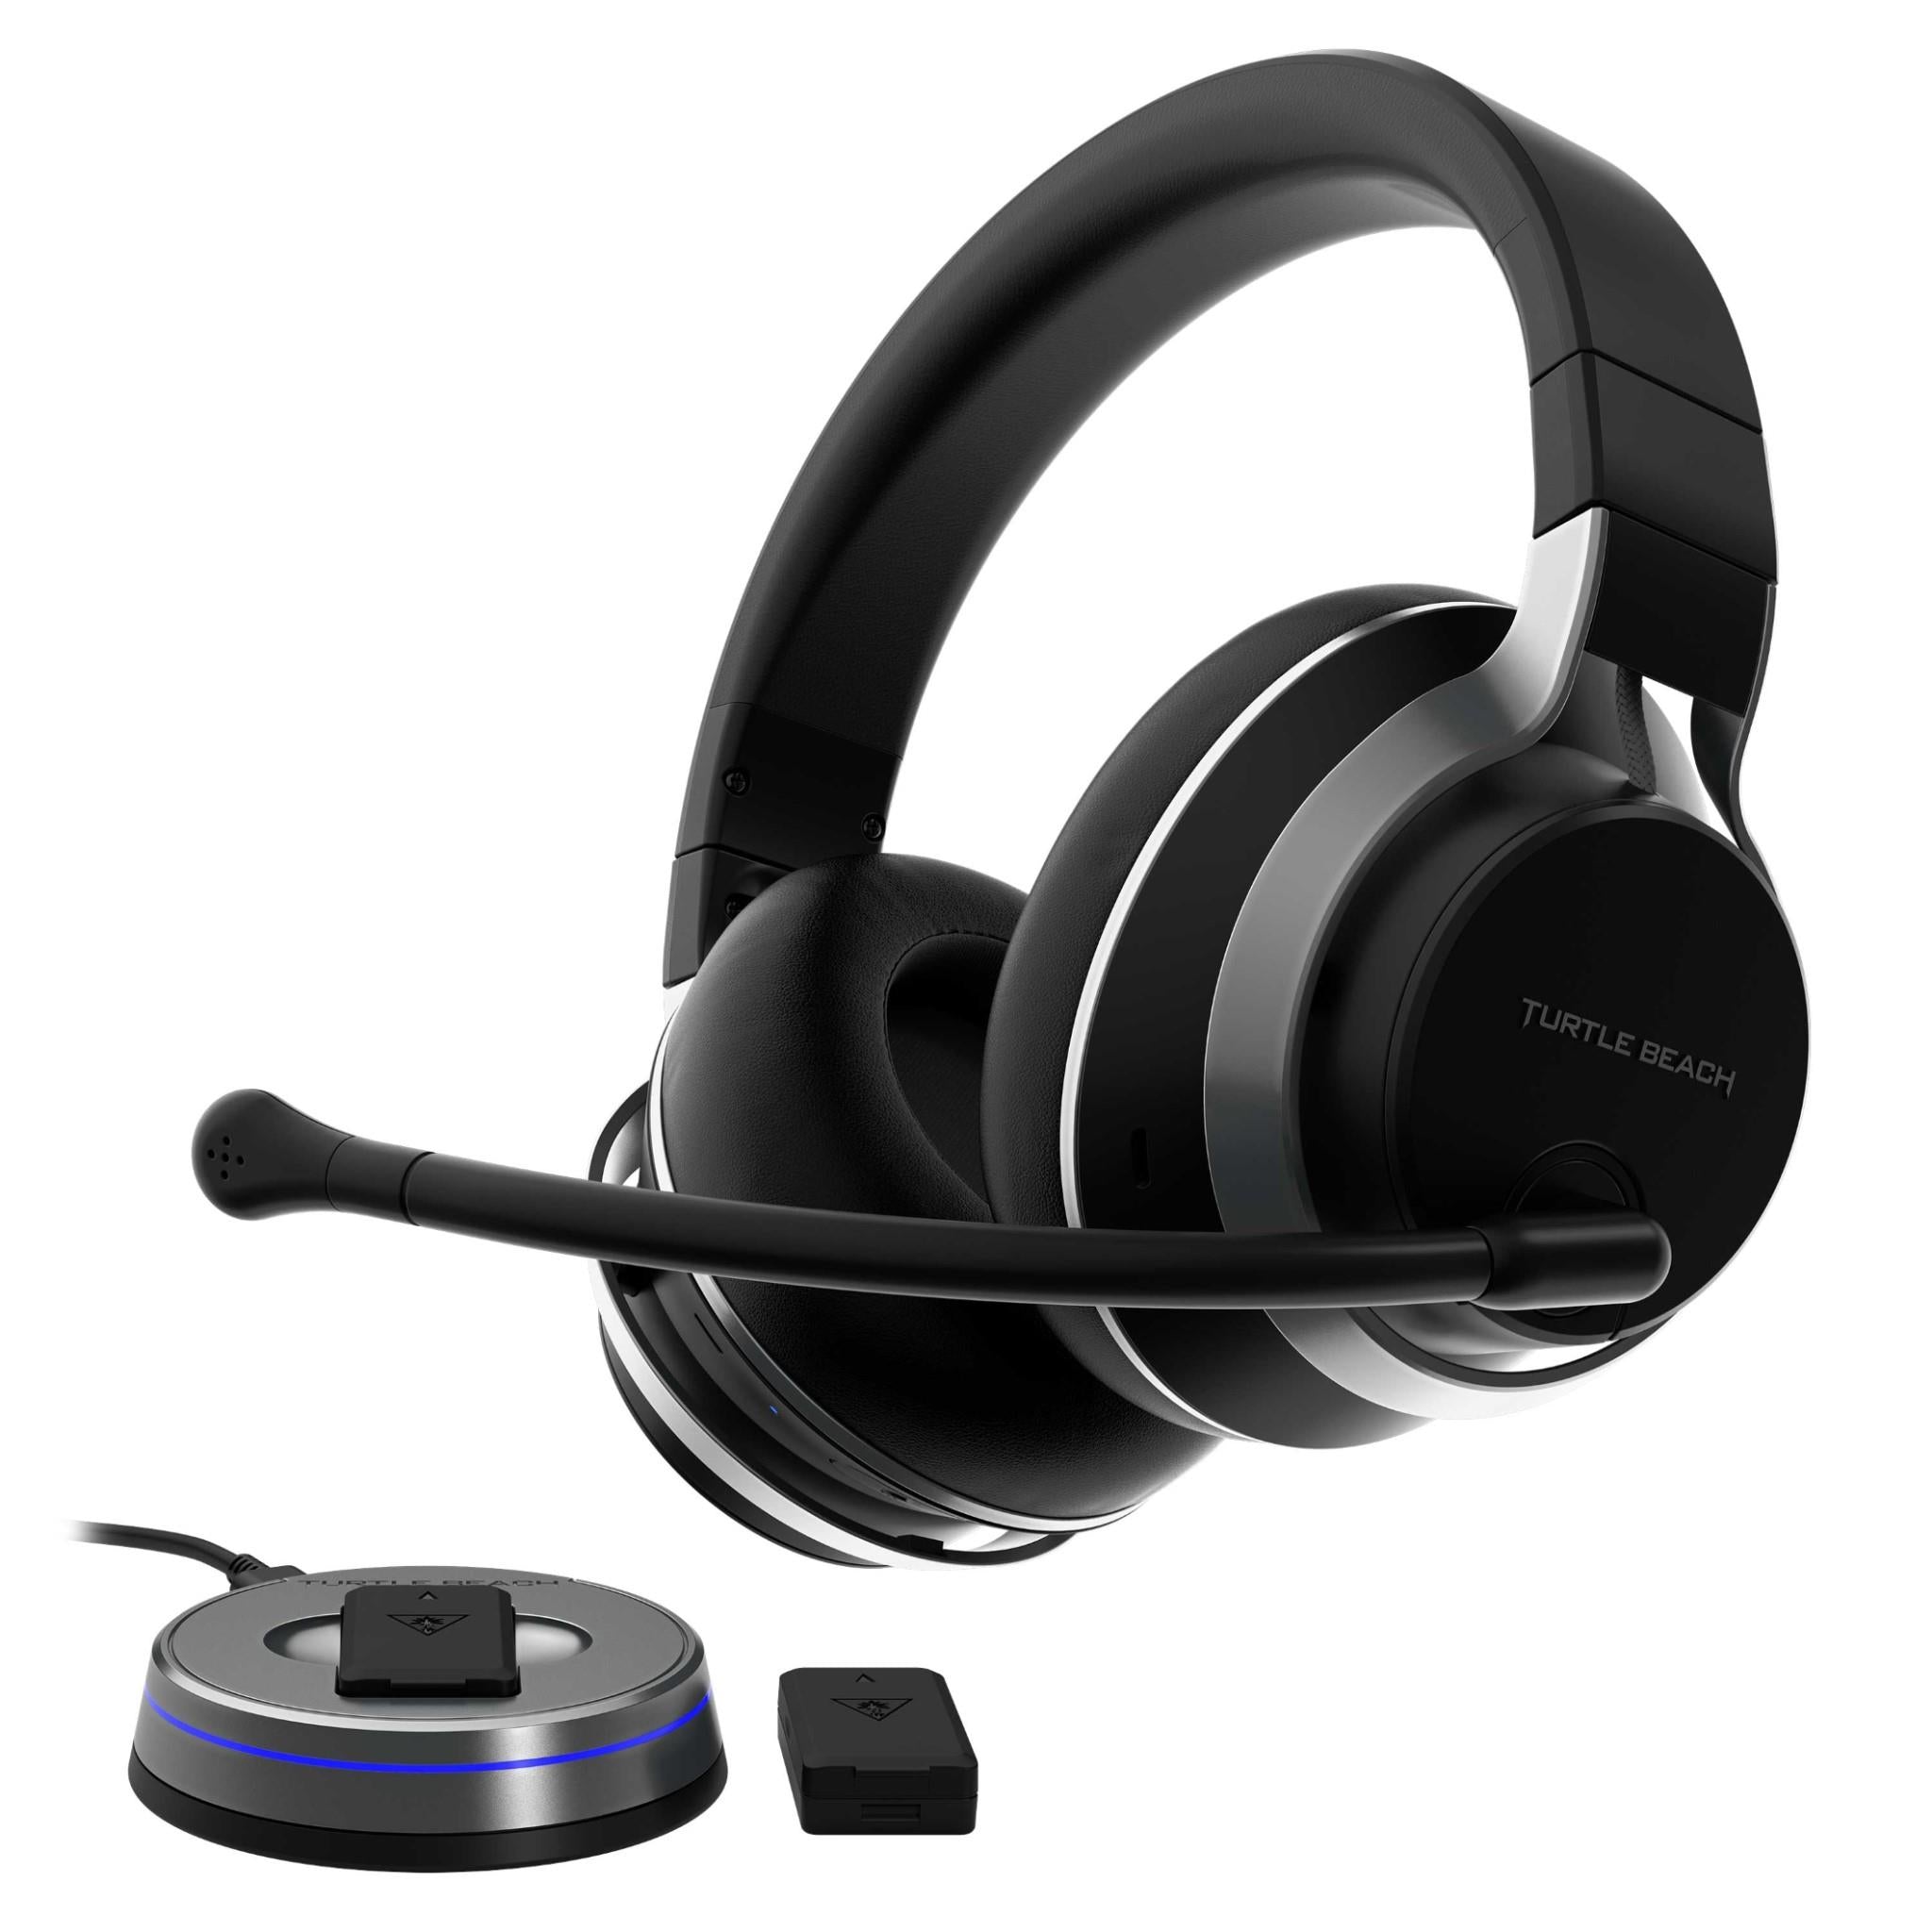 turtle beach stealth pro multiplatform wireless noise-cancelling gaming headset for playstation (black)